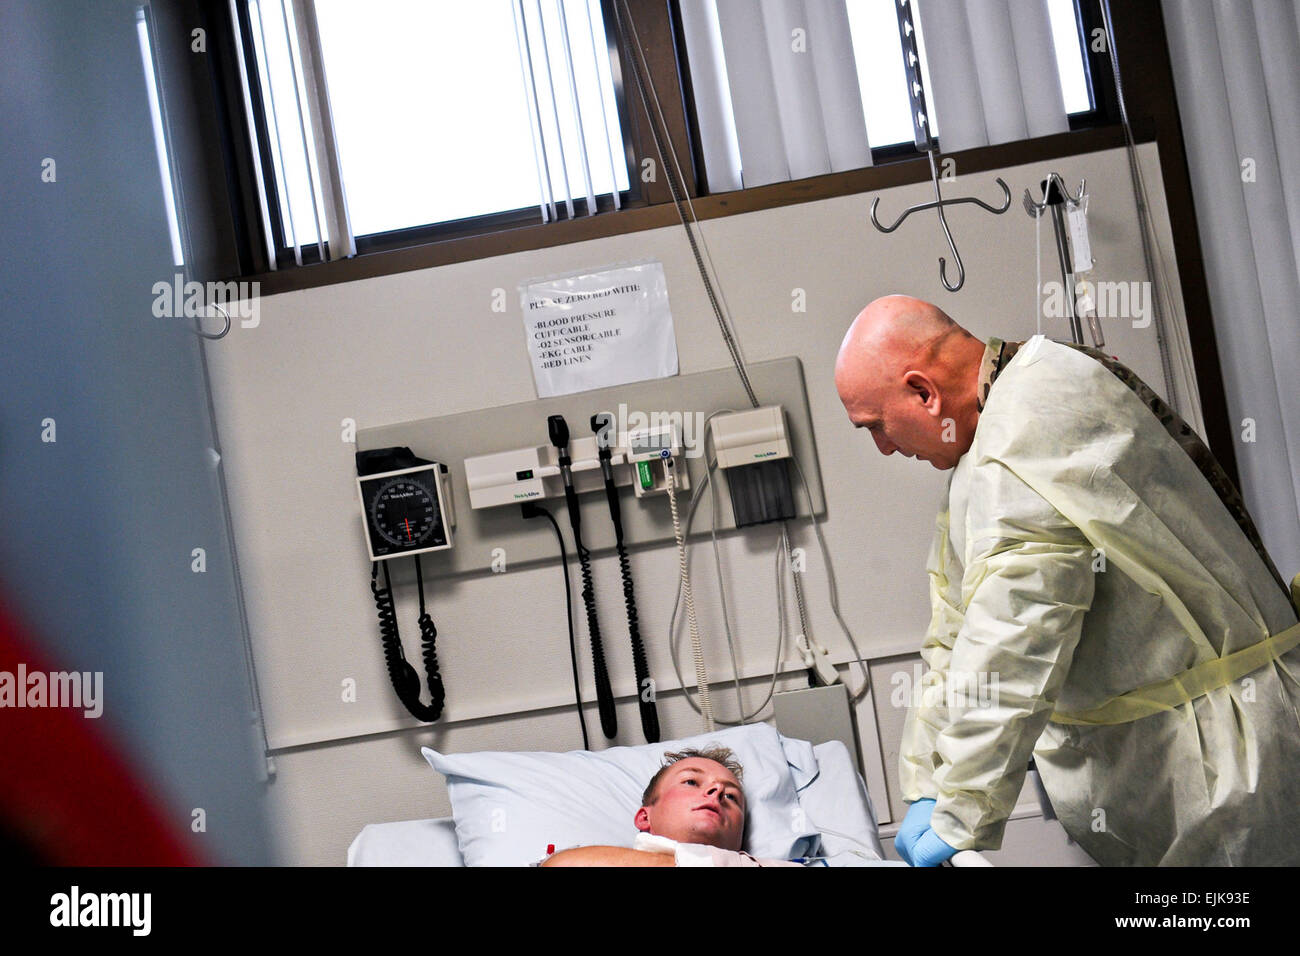 U.S. Army Chief of Staff Gen. Raymond T. Odierno meets a patient inside the intensive-care unit on Landstuhl Regional Medical Center in Landstuhl, Germany during a visit Dec. 19, 2011.  Staff Sgt. Teddy Wade Stock Photo